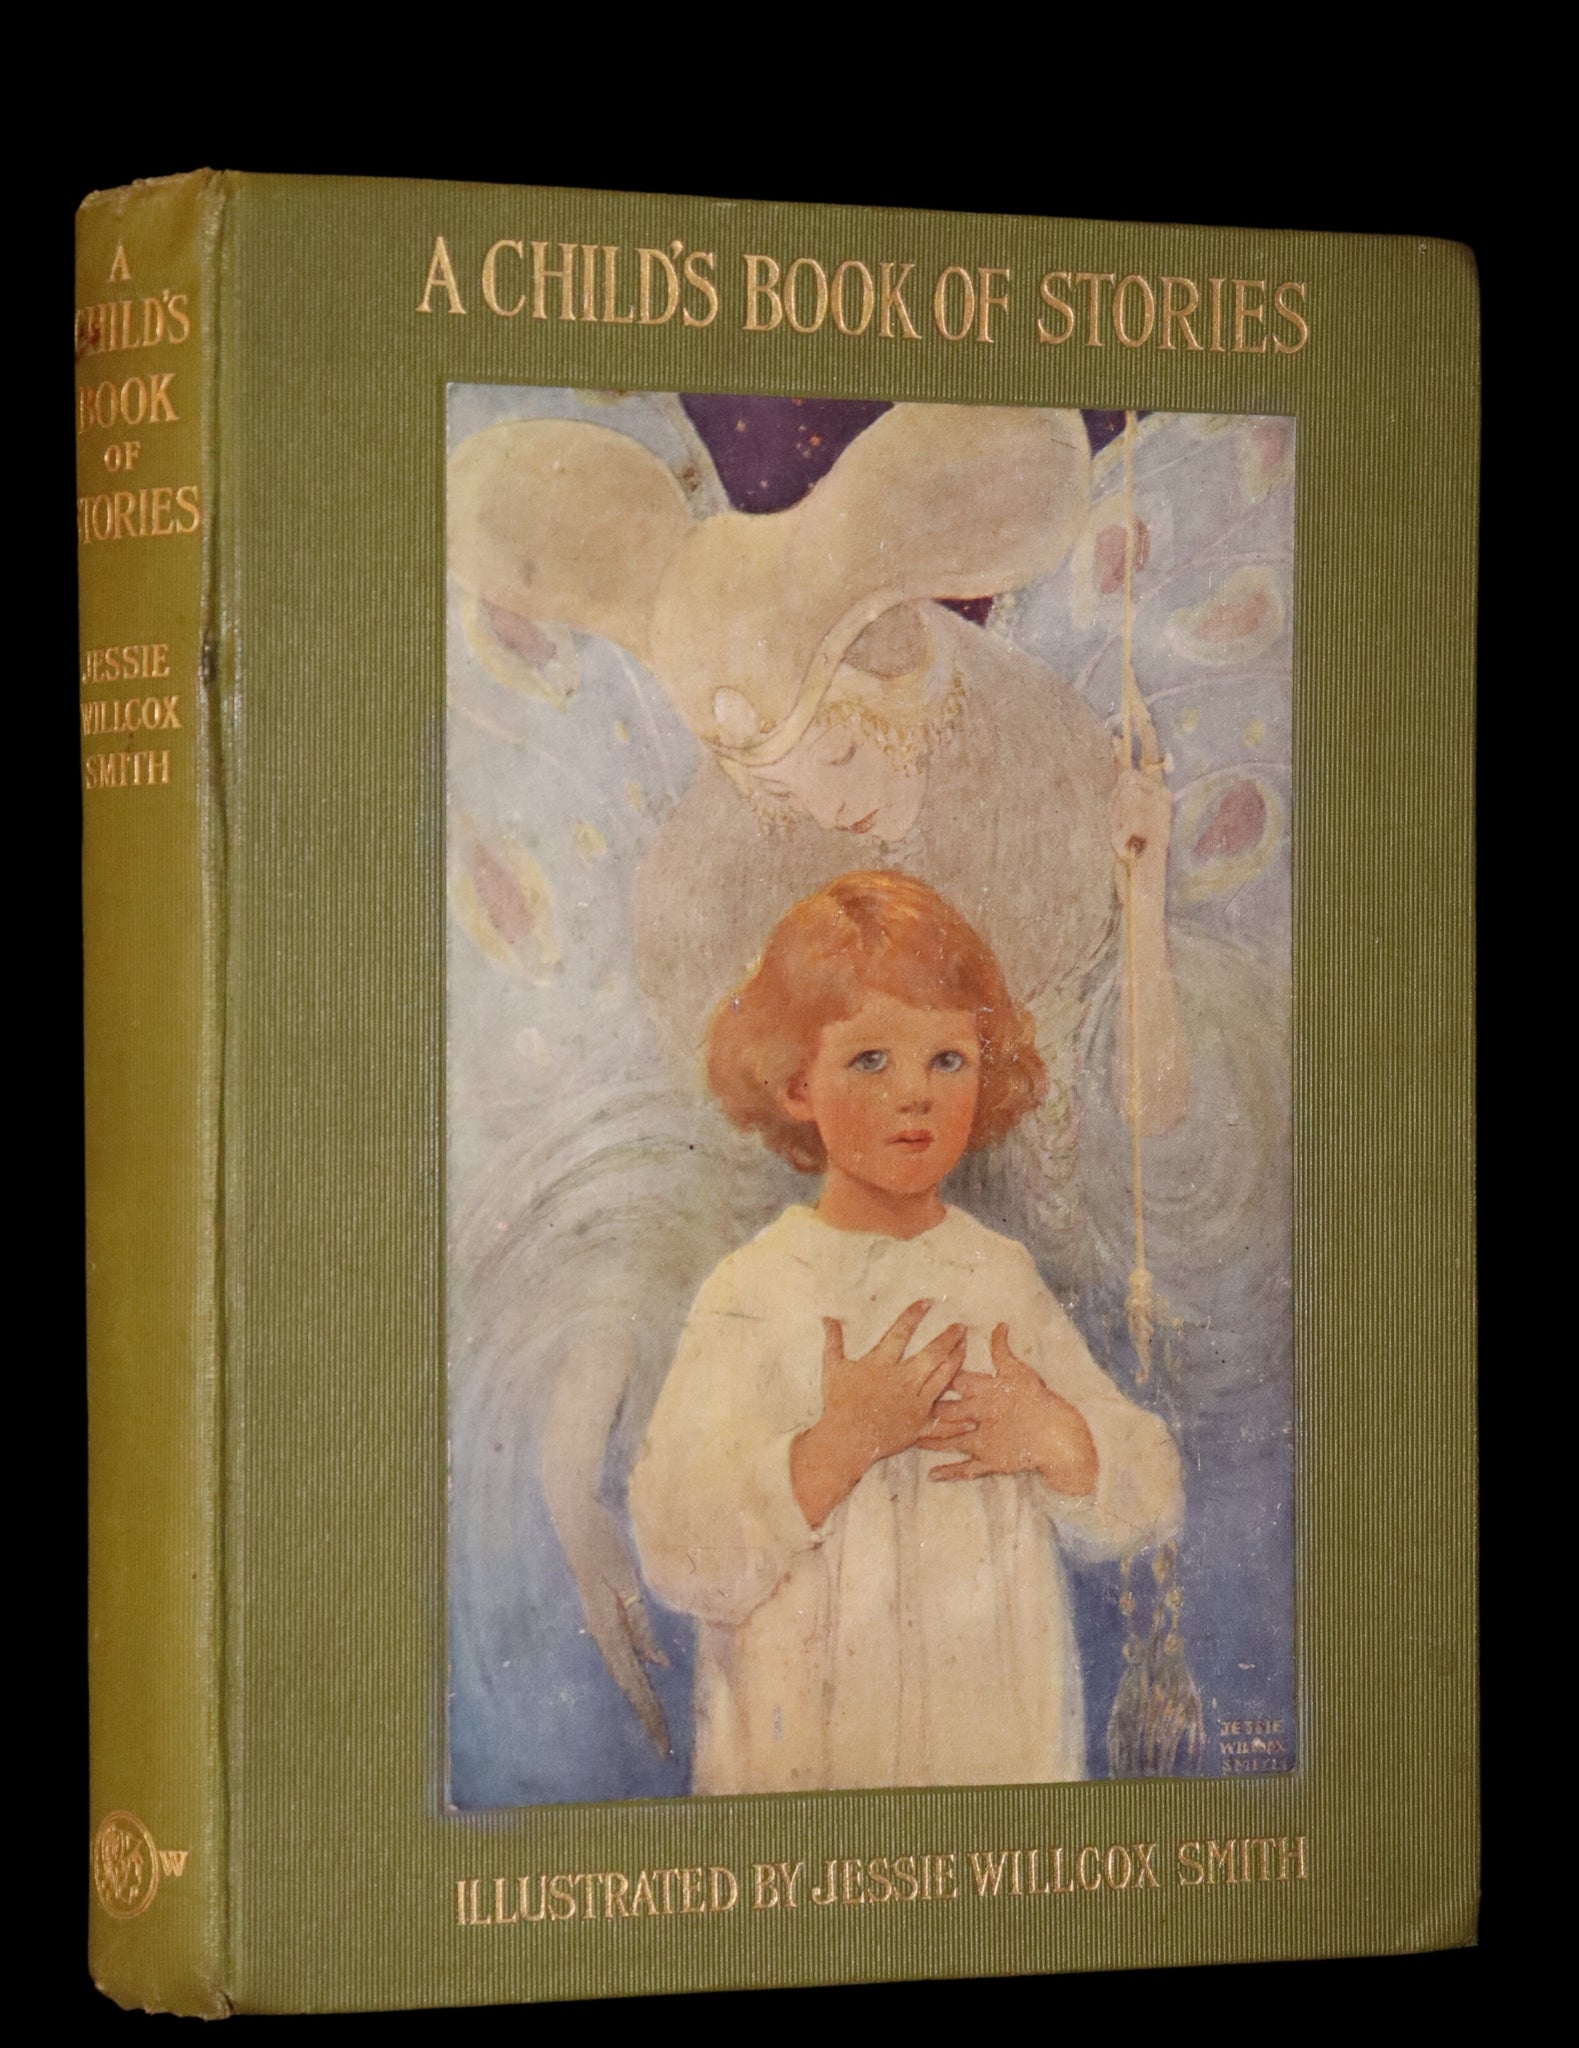 1913 Rare First UK Edition - A Child's Book of Stories illustrated by Jessie Willcox Smith.